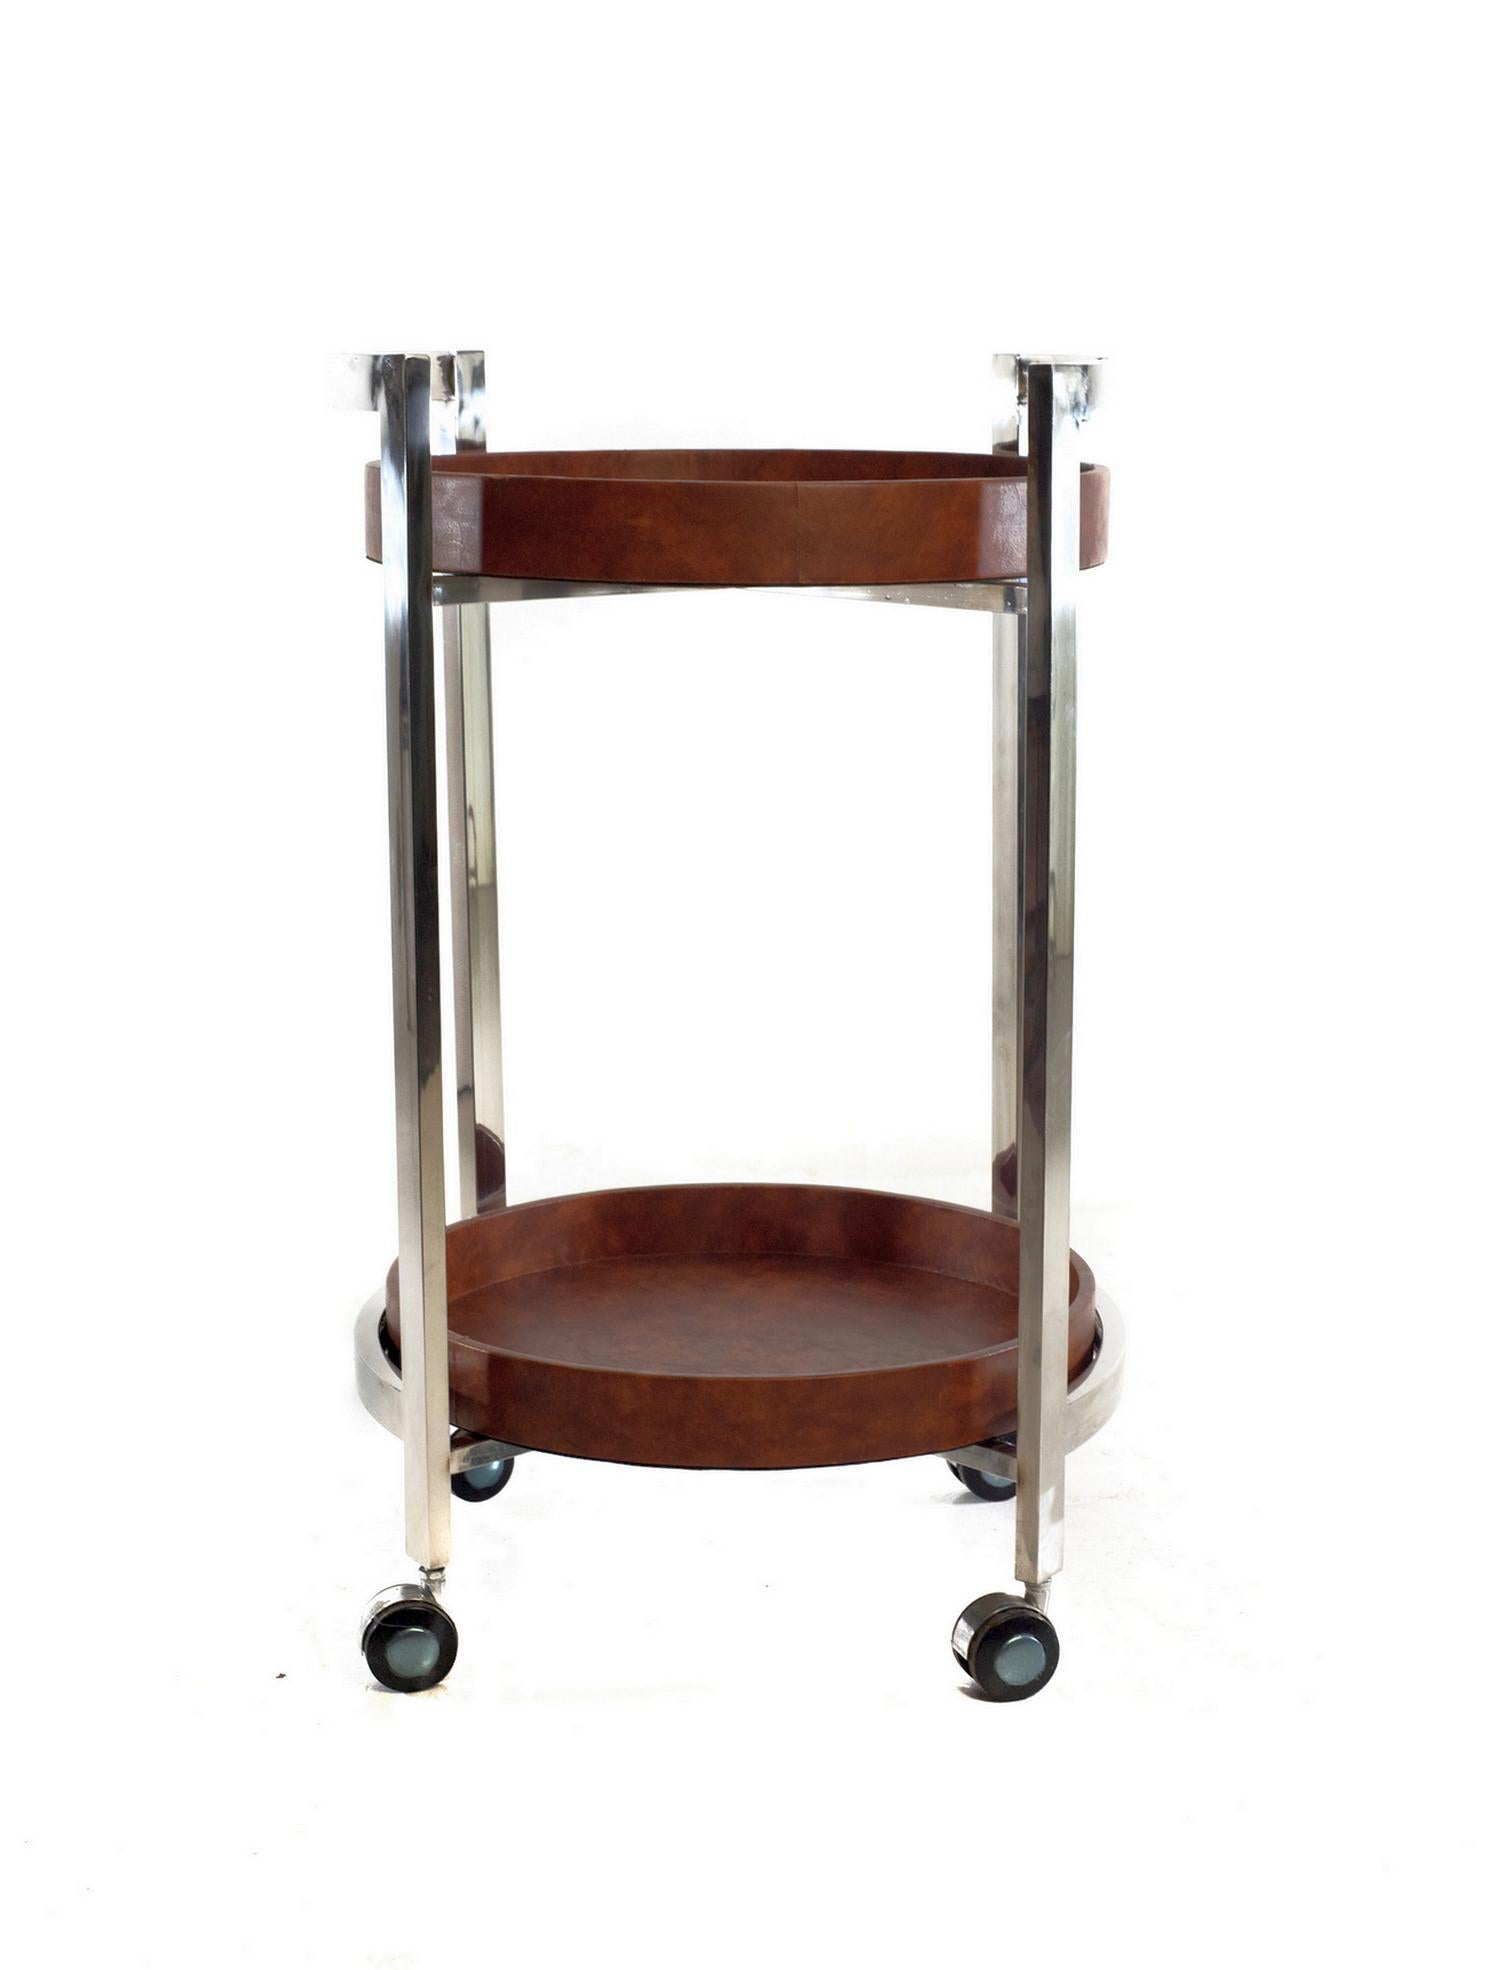 Slick Italian two tiered round bar cart from the 1970's made in chrome and faux leather. The trays are possible to lift off and use for serving as well. All original and in very nice condition.